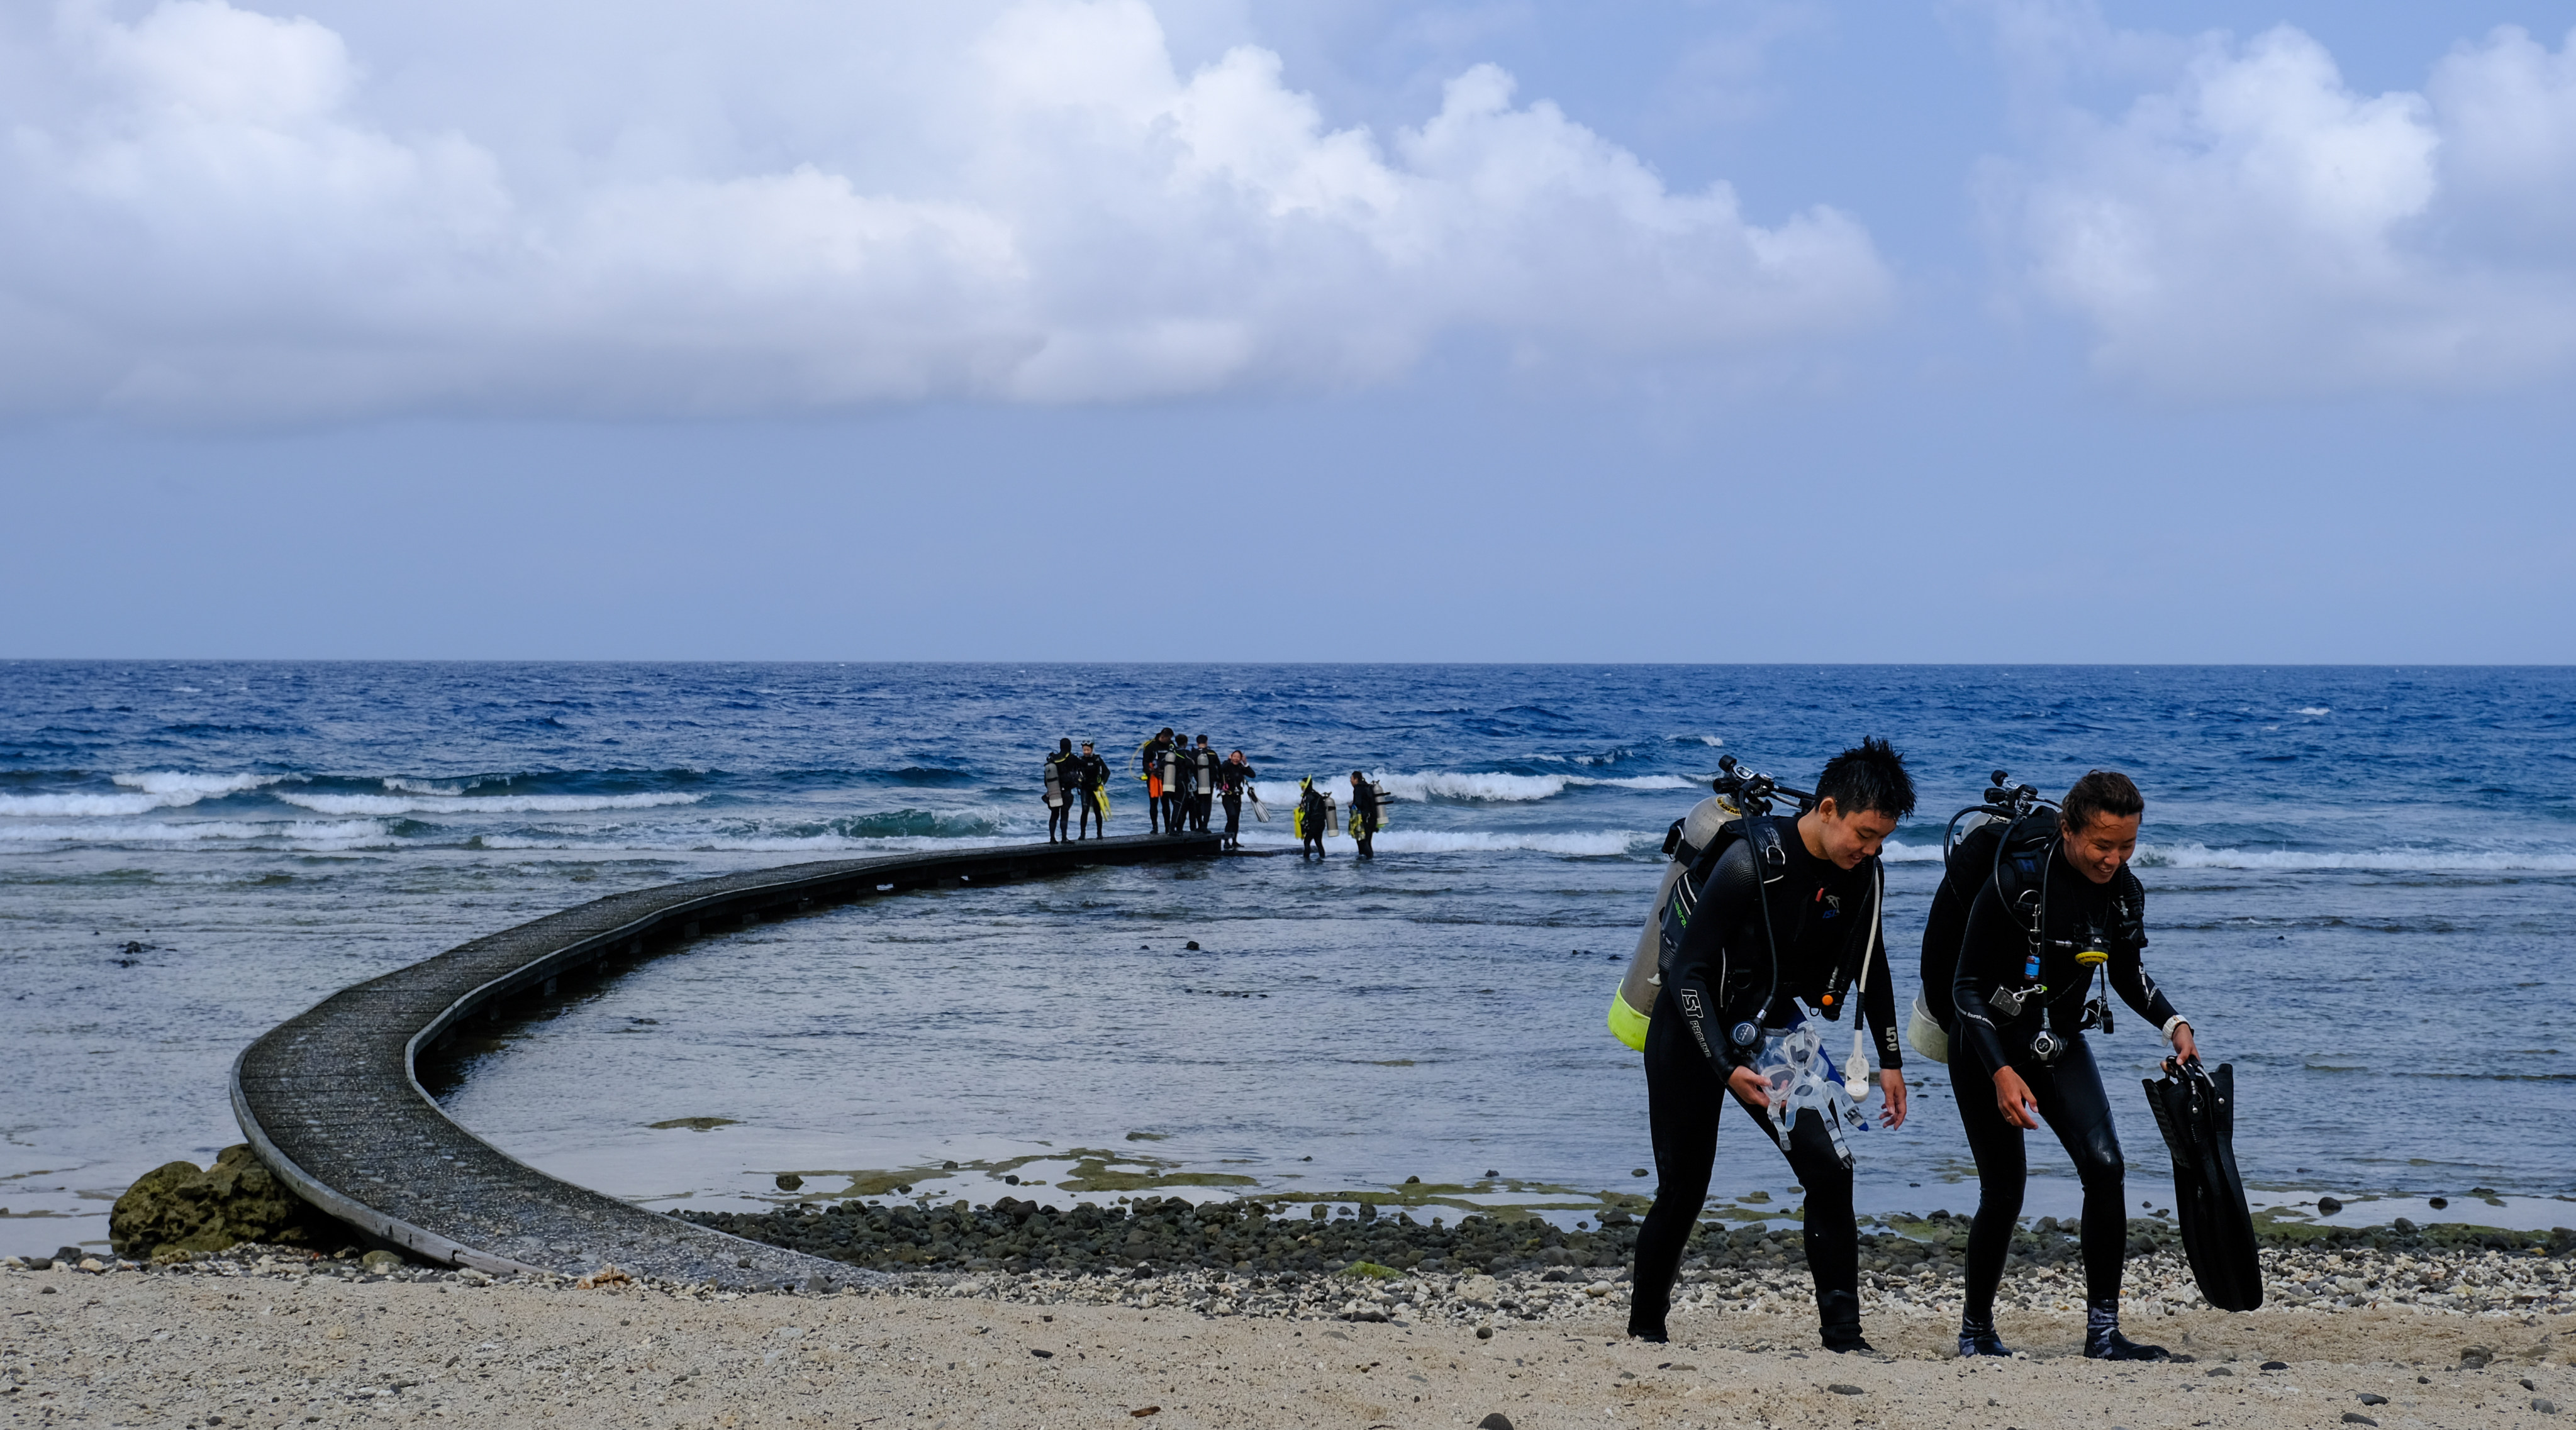 Scuba divers emerge from the waters of Taiwan’s southern Green Island. It and another southern island, Liuqiu, are less touristy and offer easily accessible snorkelling and diving among corals, and a laid-back atmosphere. Photo: Pete Ford